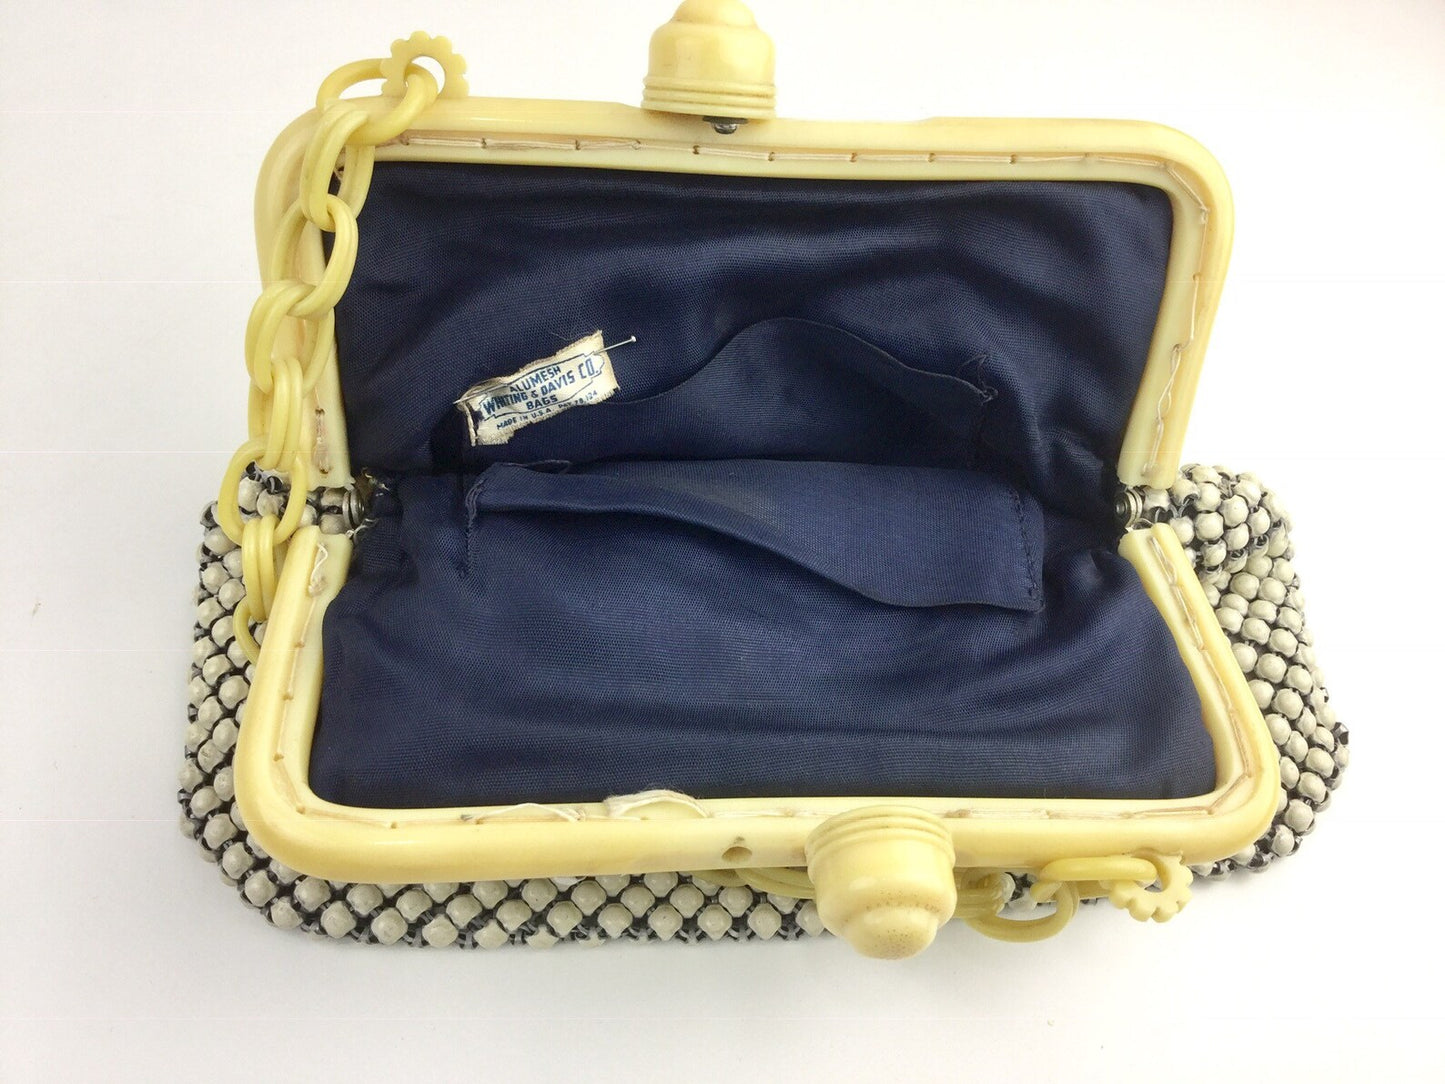 Vintage 1940s Whiting and Davis Enamel Mesh Handbag with Early Plastic Frame, Alumesh Evening Bag, White and Cream Top Handle Purse